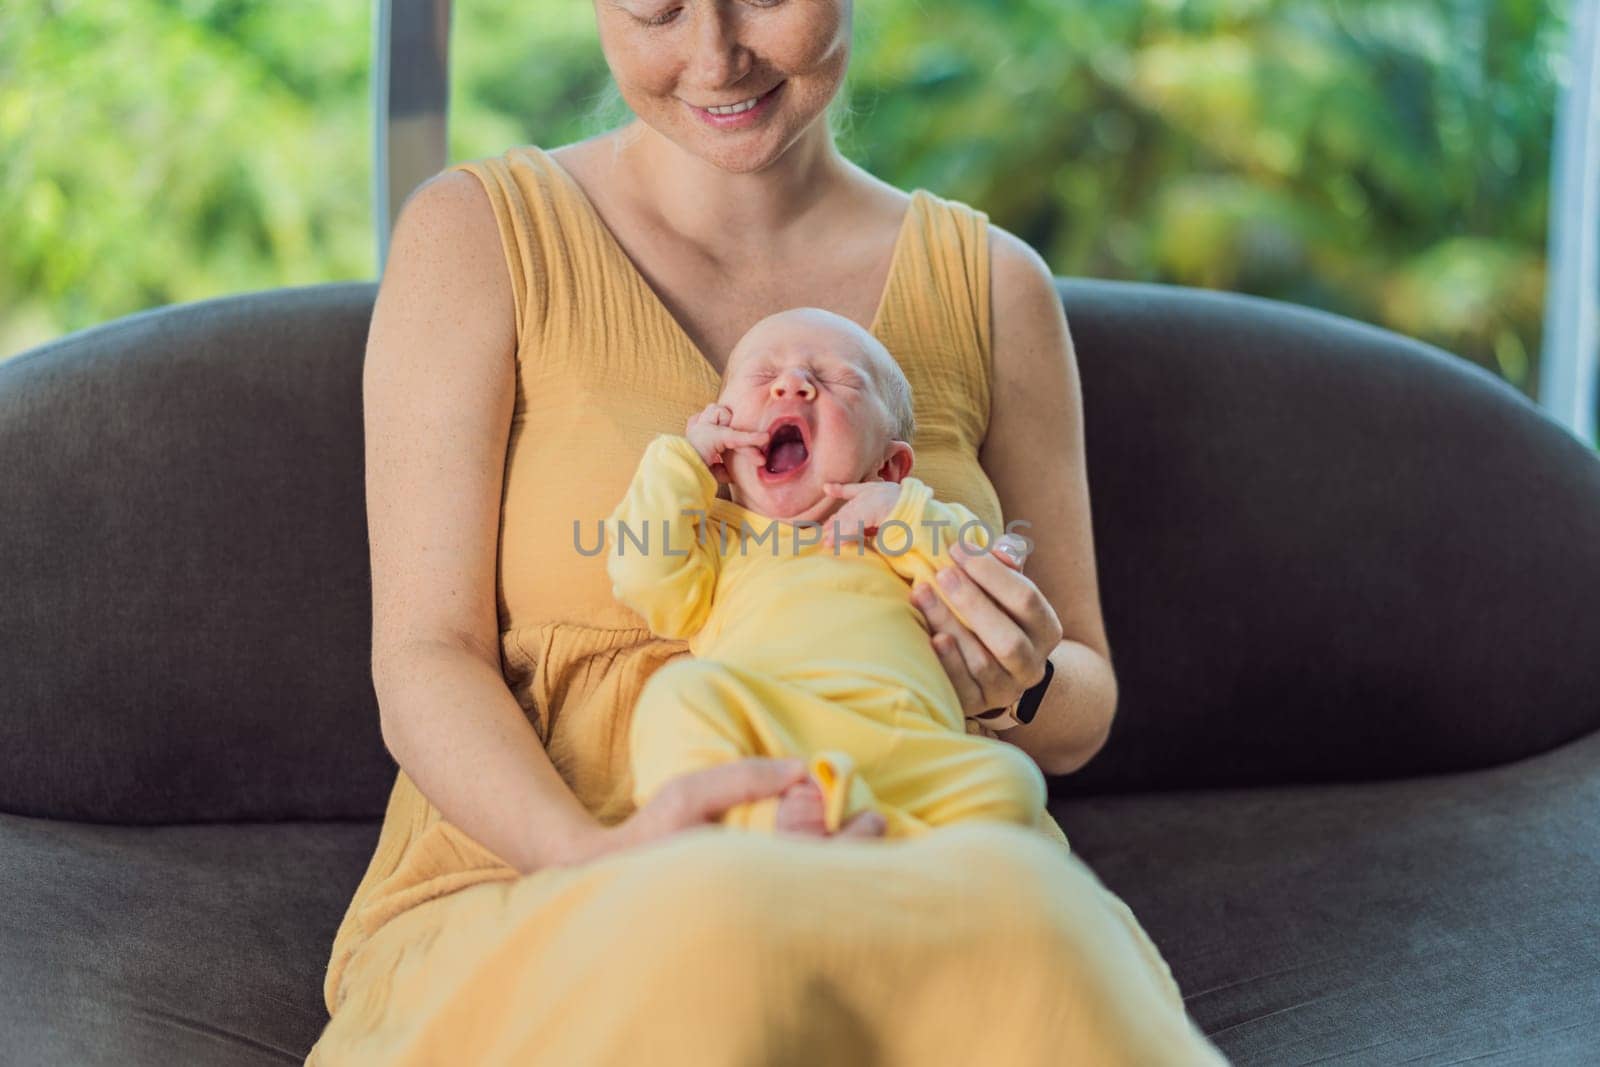 Mom with newborn baby relaxing on the sofa at home. This tender moment highlights the bond between mother and child in a comfortable and loving family environment.